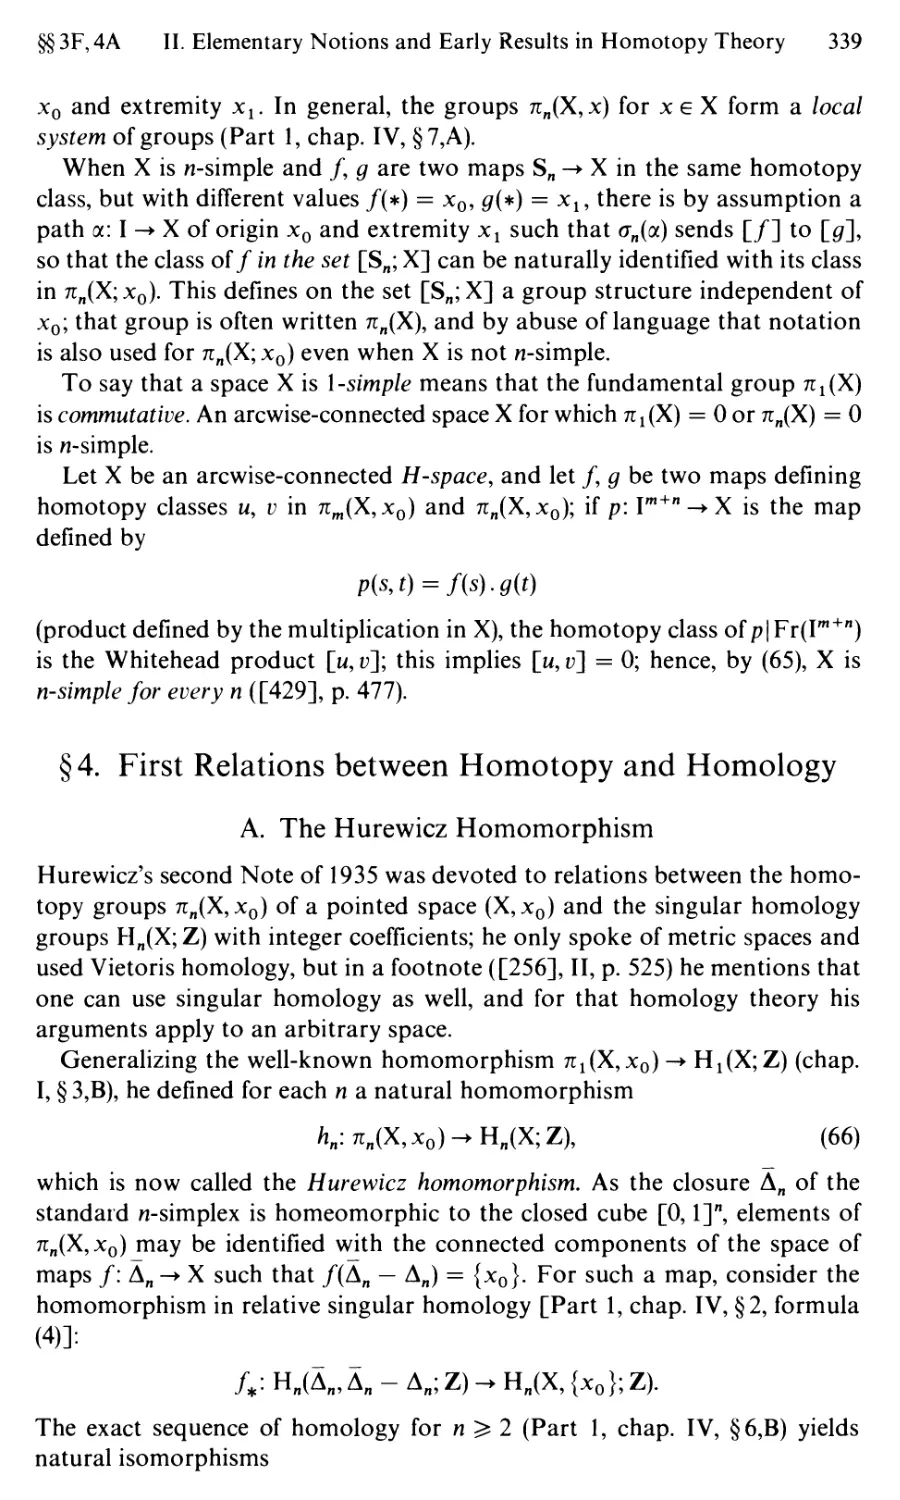 §4. First Relations between Homotopy and Homology